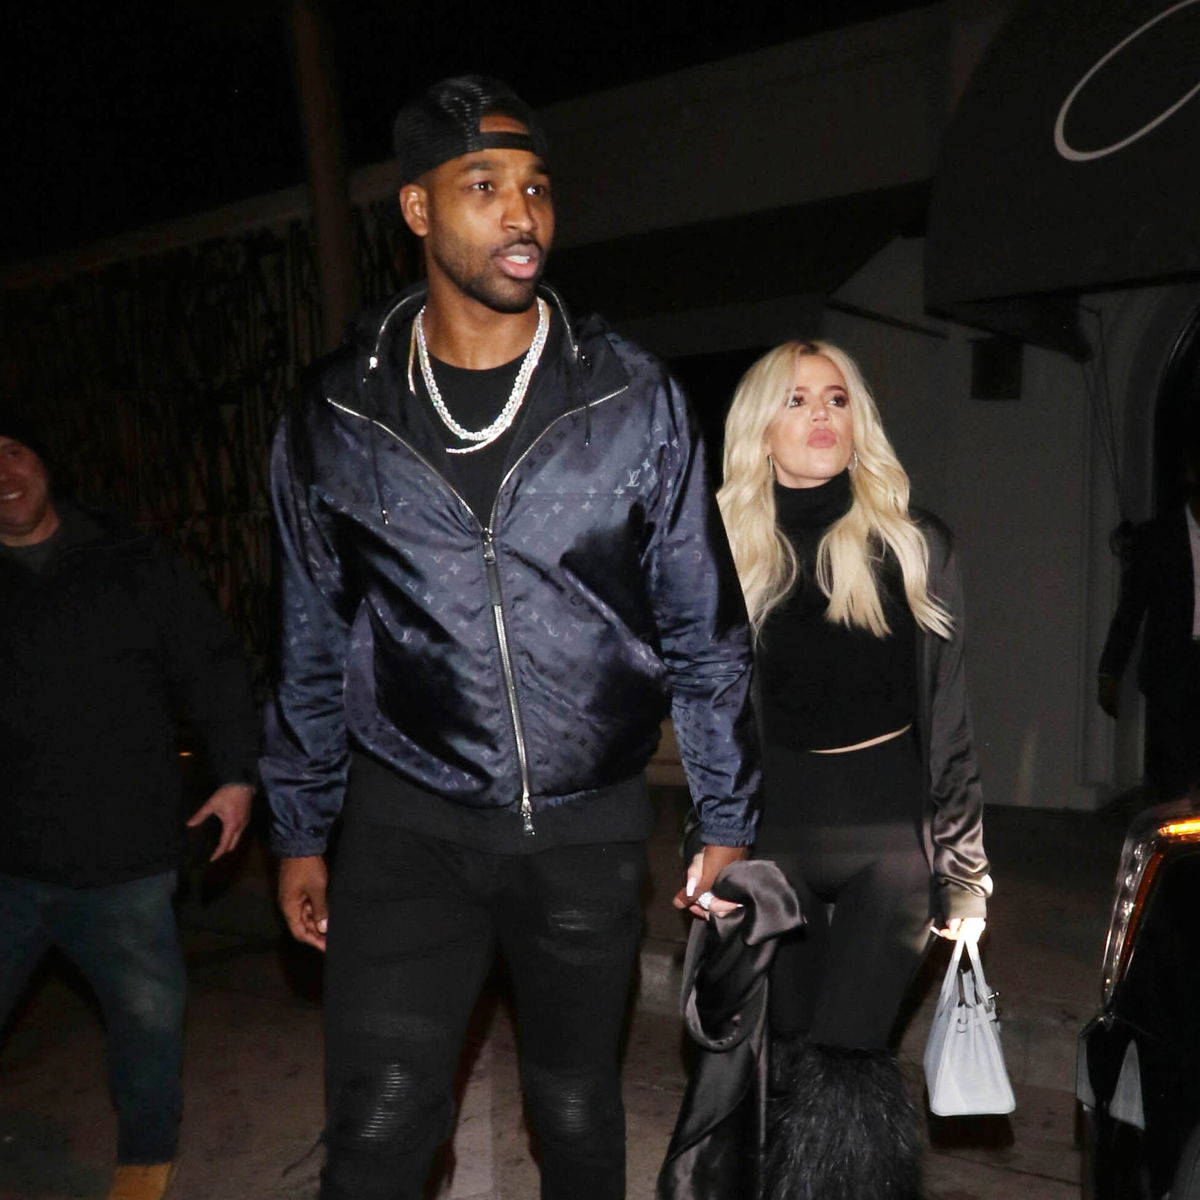 <i>Hollywood To You/Star Max/GC Images/Getty Images</i><br/>Khloe Kardashian and Tristan Thompson